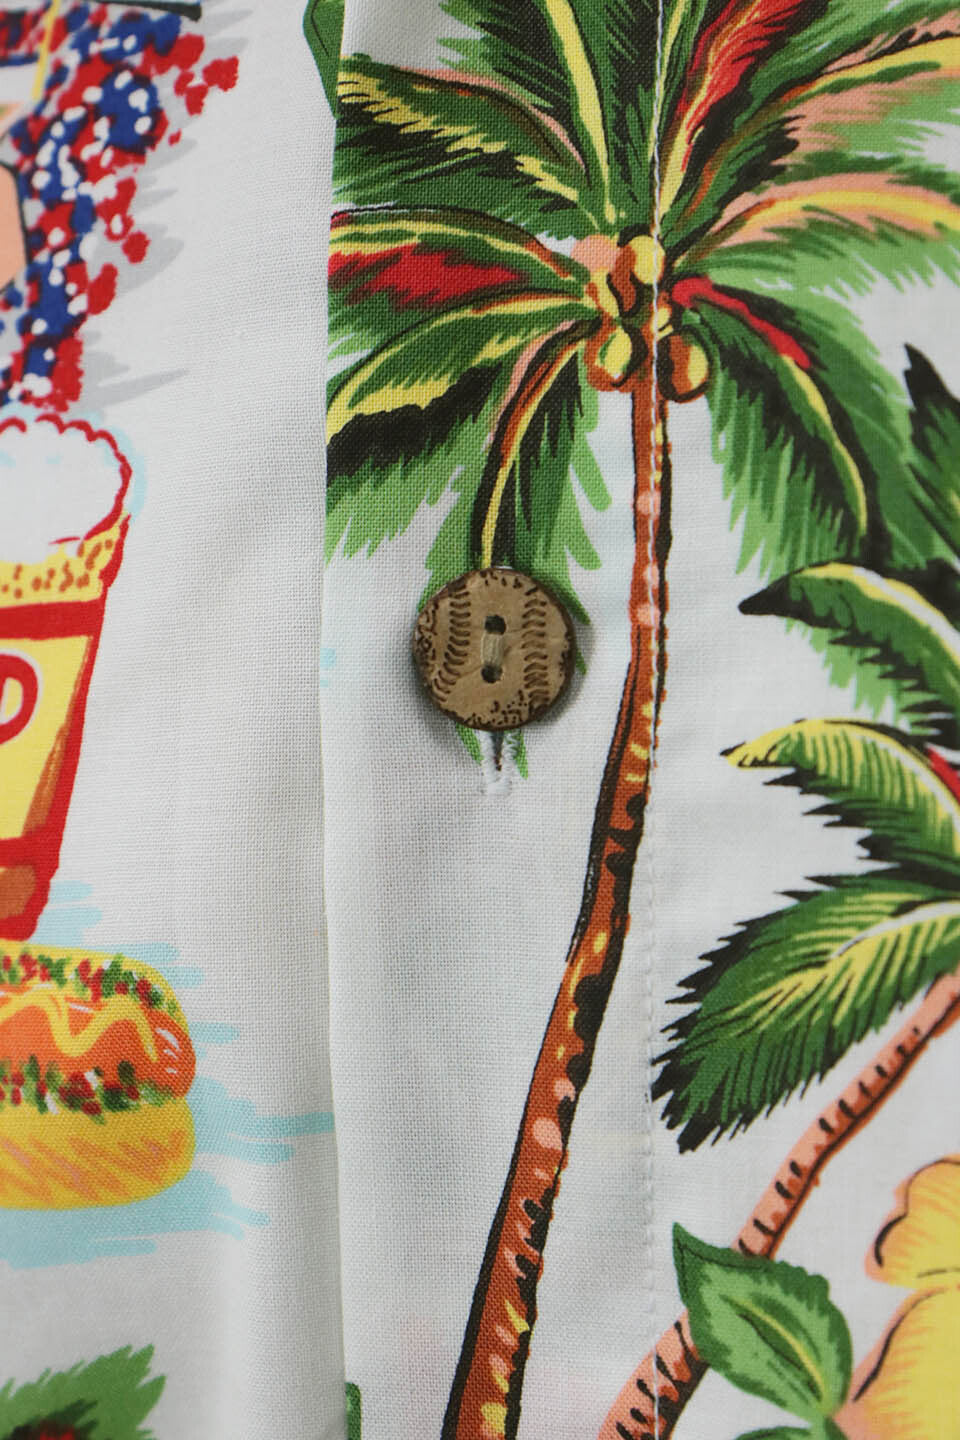 A close up of the custom laxer engraved wooden buttons on the Philadelphia Phillies Authentic Hawaiian Print Polo Shirt